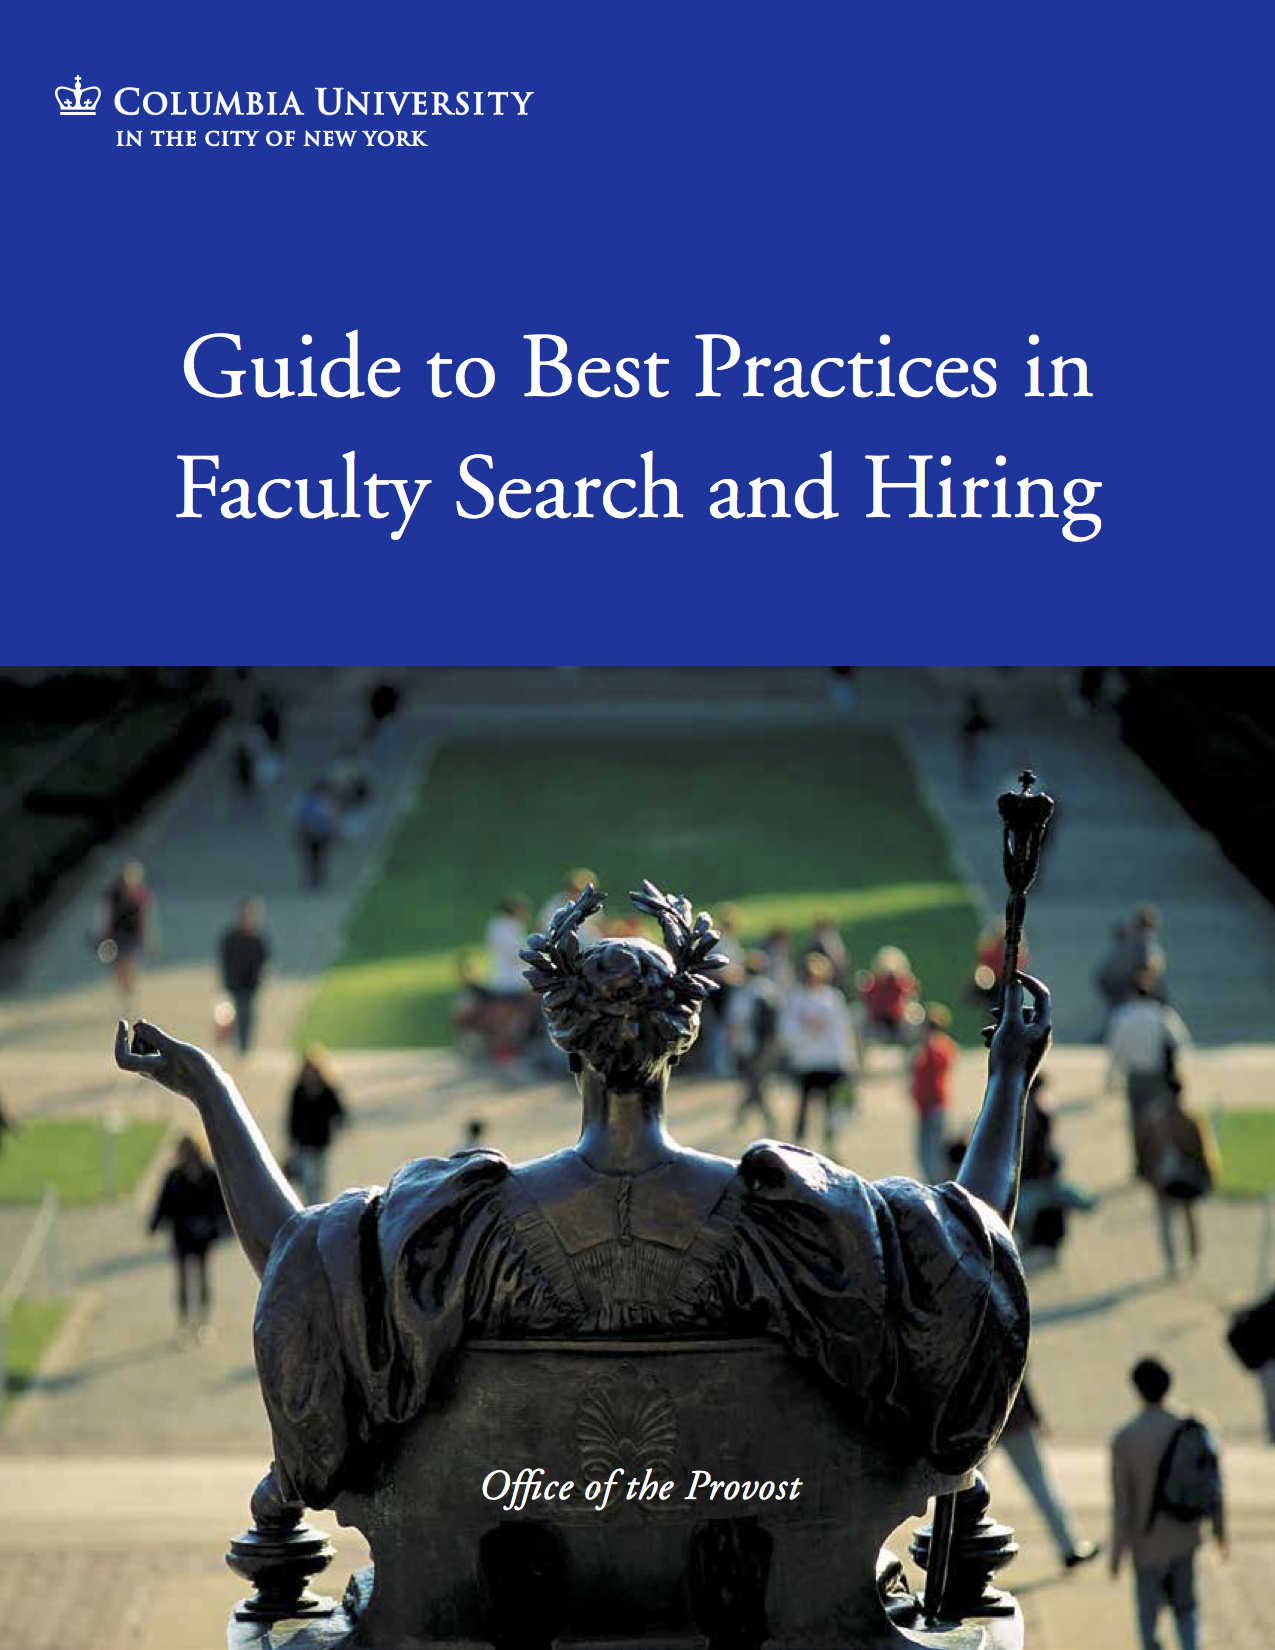 White text on blue background with image of Alma Mater. Text: Guide to Best Practices in Faculty Search and Hiring